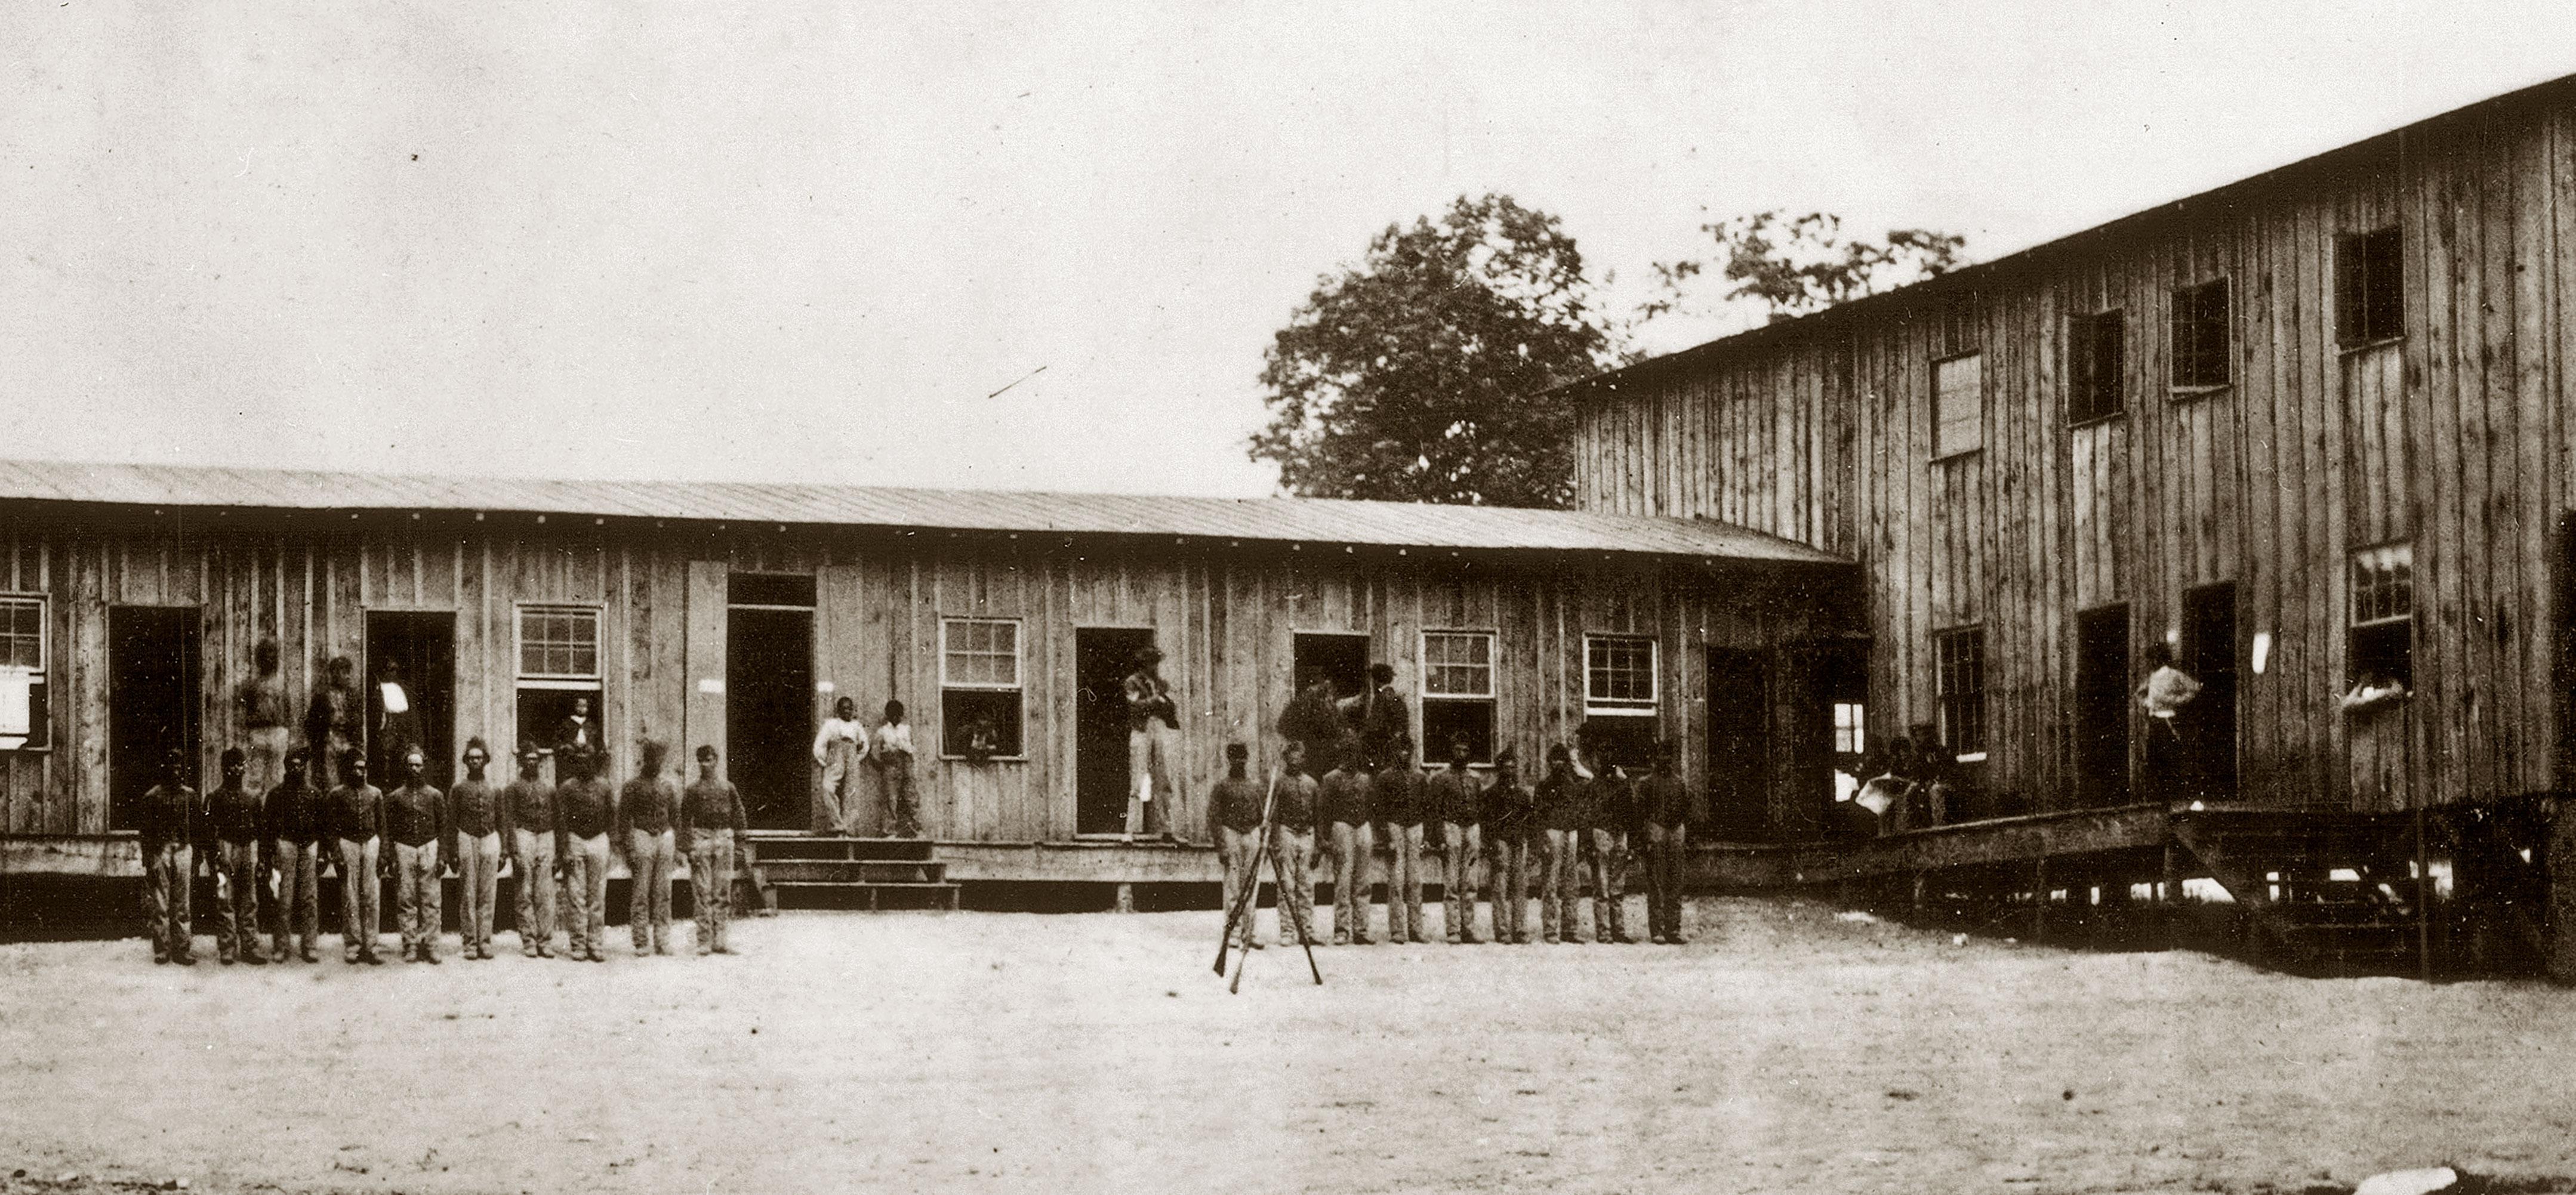 African American Civil War soldiers stand at attention outside their barracks.